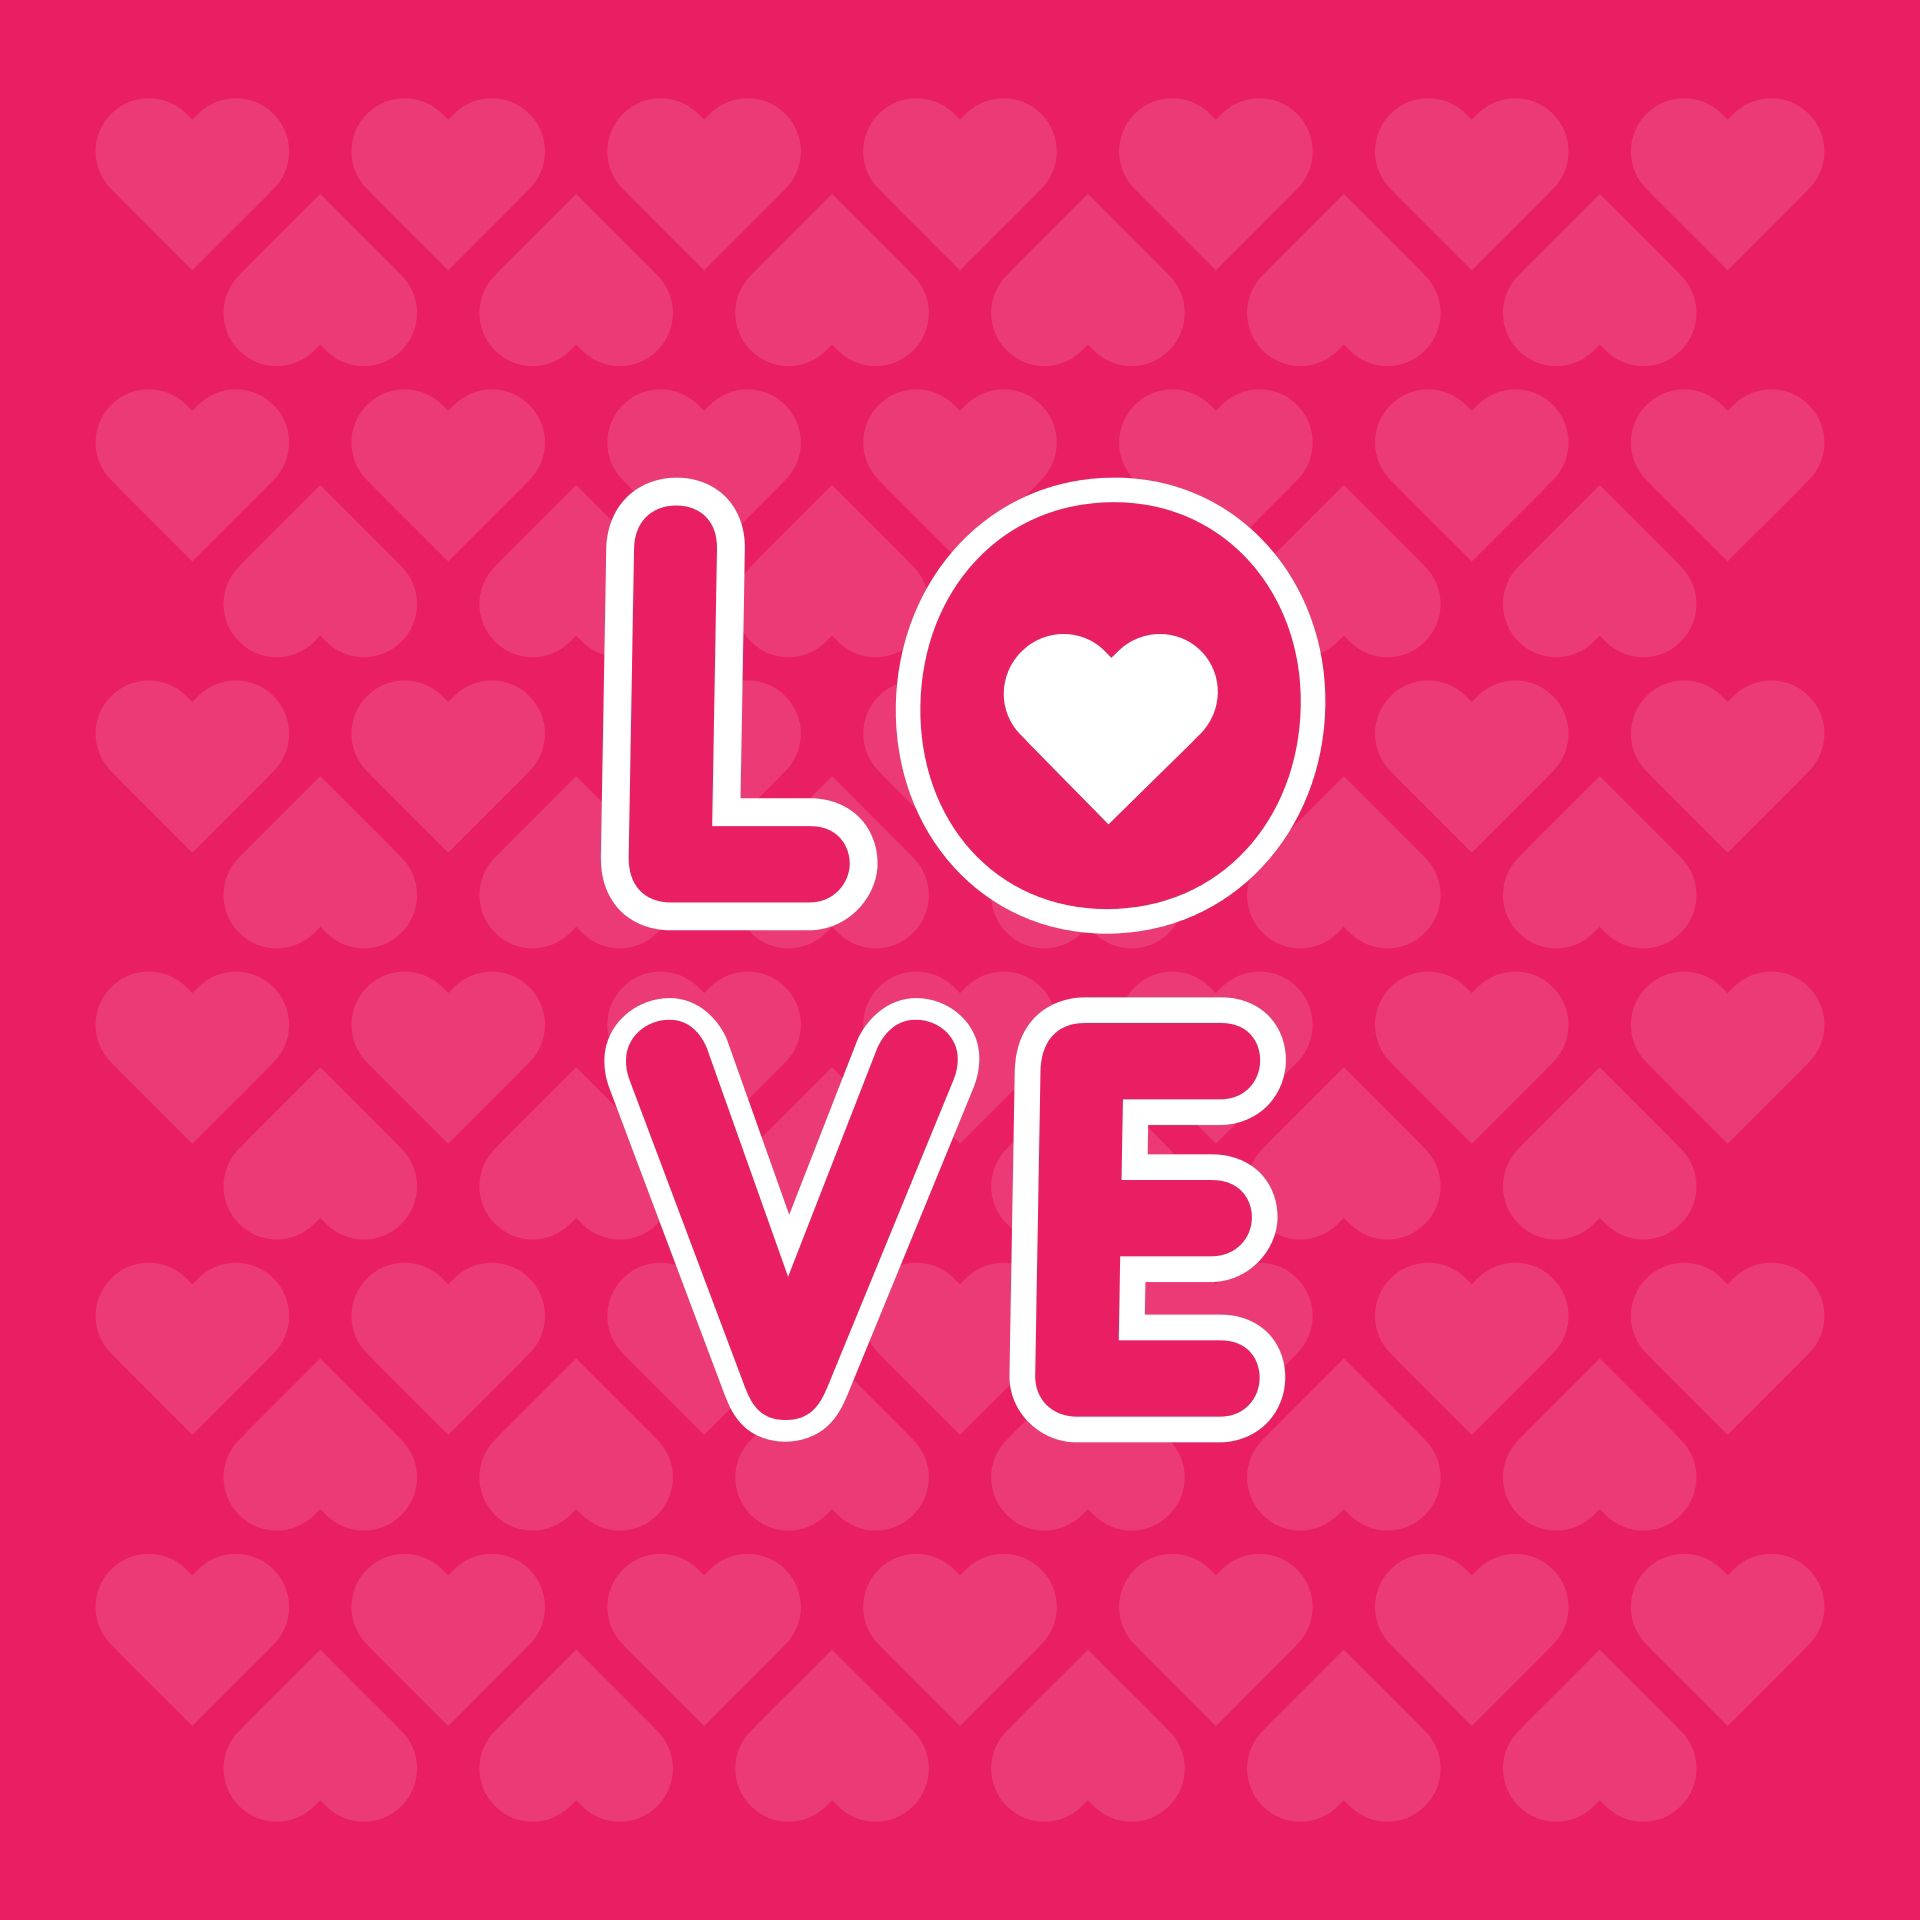 Show your love with an inscription and hearts Wallpaper